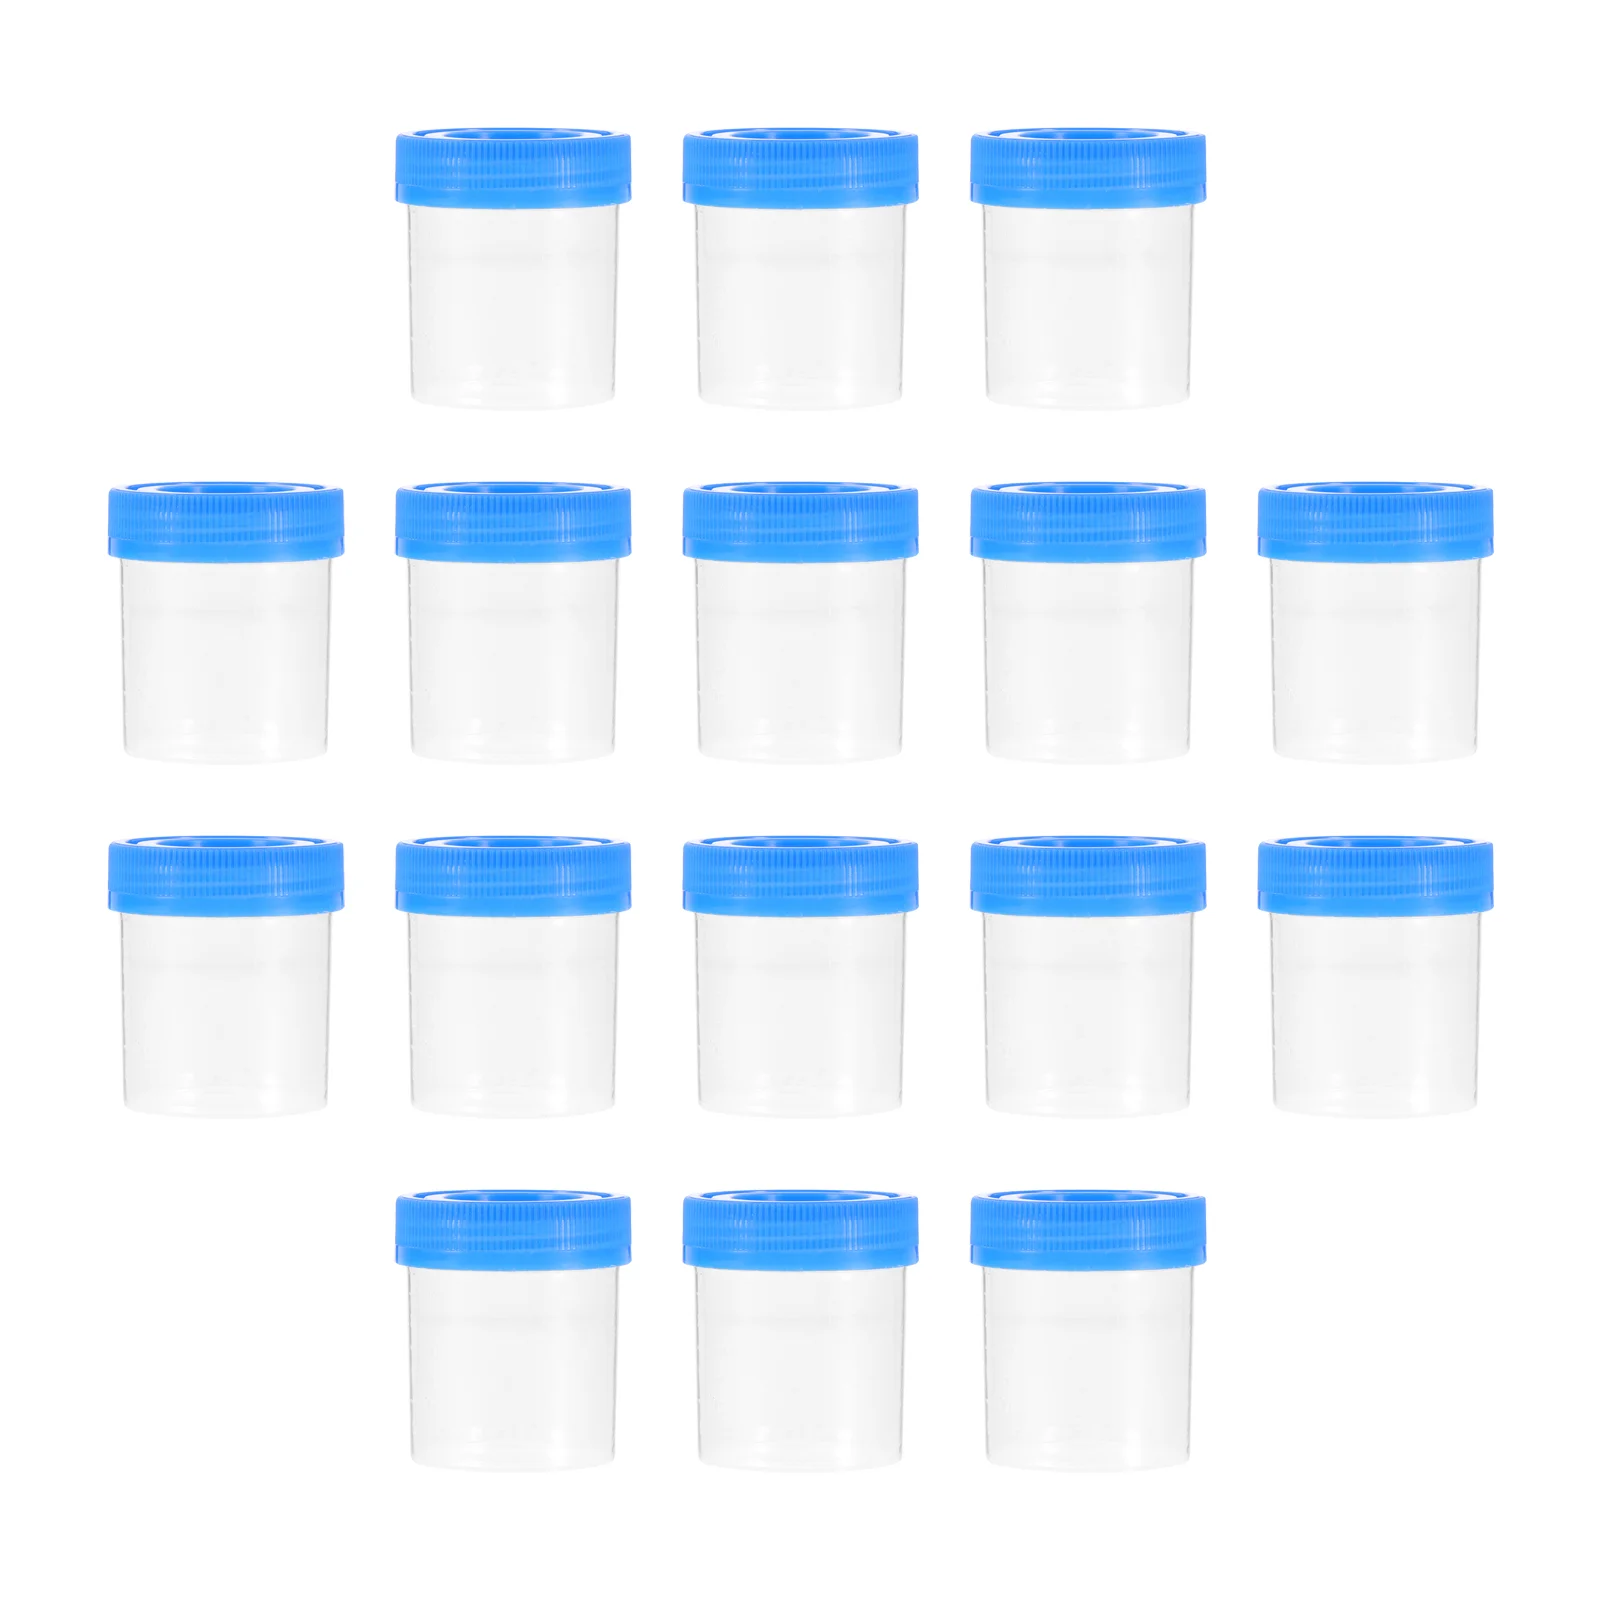 

30 Pcs Disposable Sputum Cup Medical Scale Plastic Container Fecal Urine Specimen Lid Cups Sample Covers